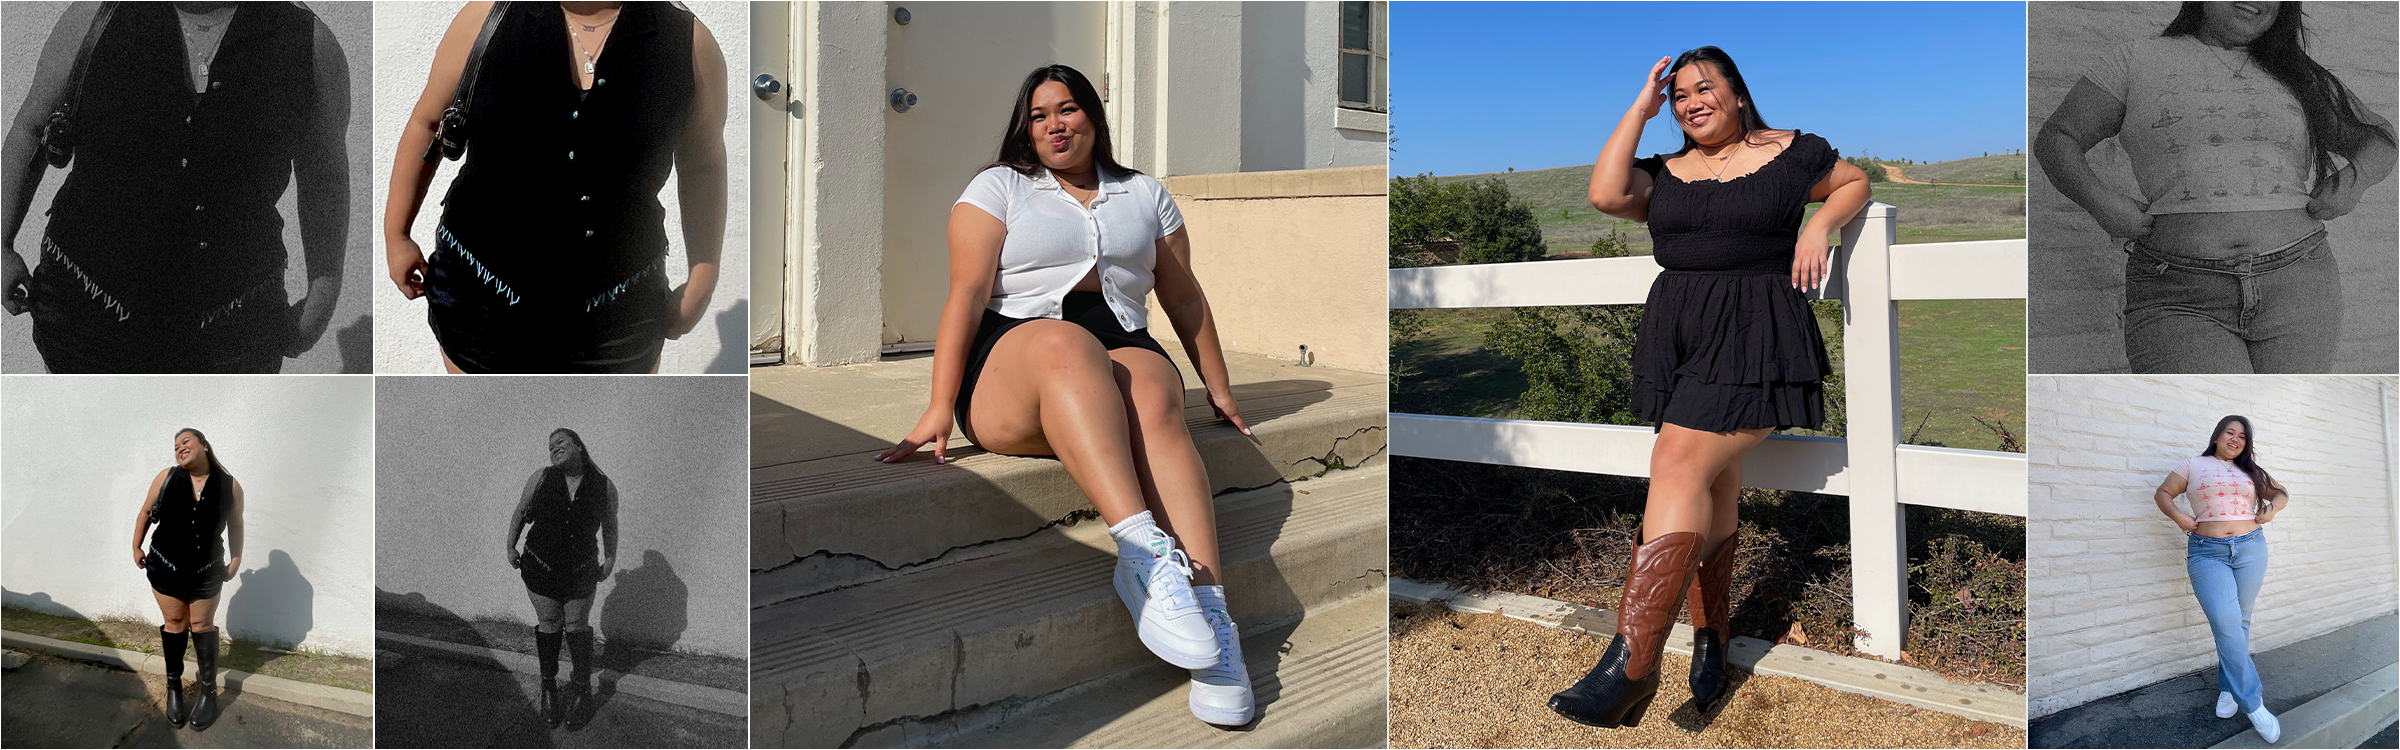 I'm a Plus-Size Creator, and Here's How I Define My Style Beyond Stereotypes